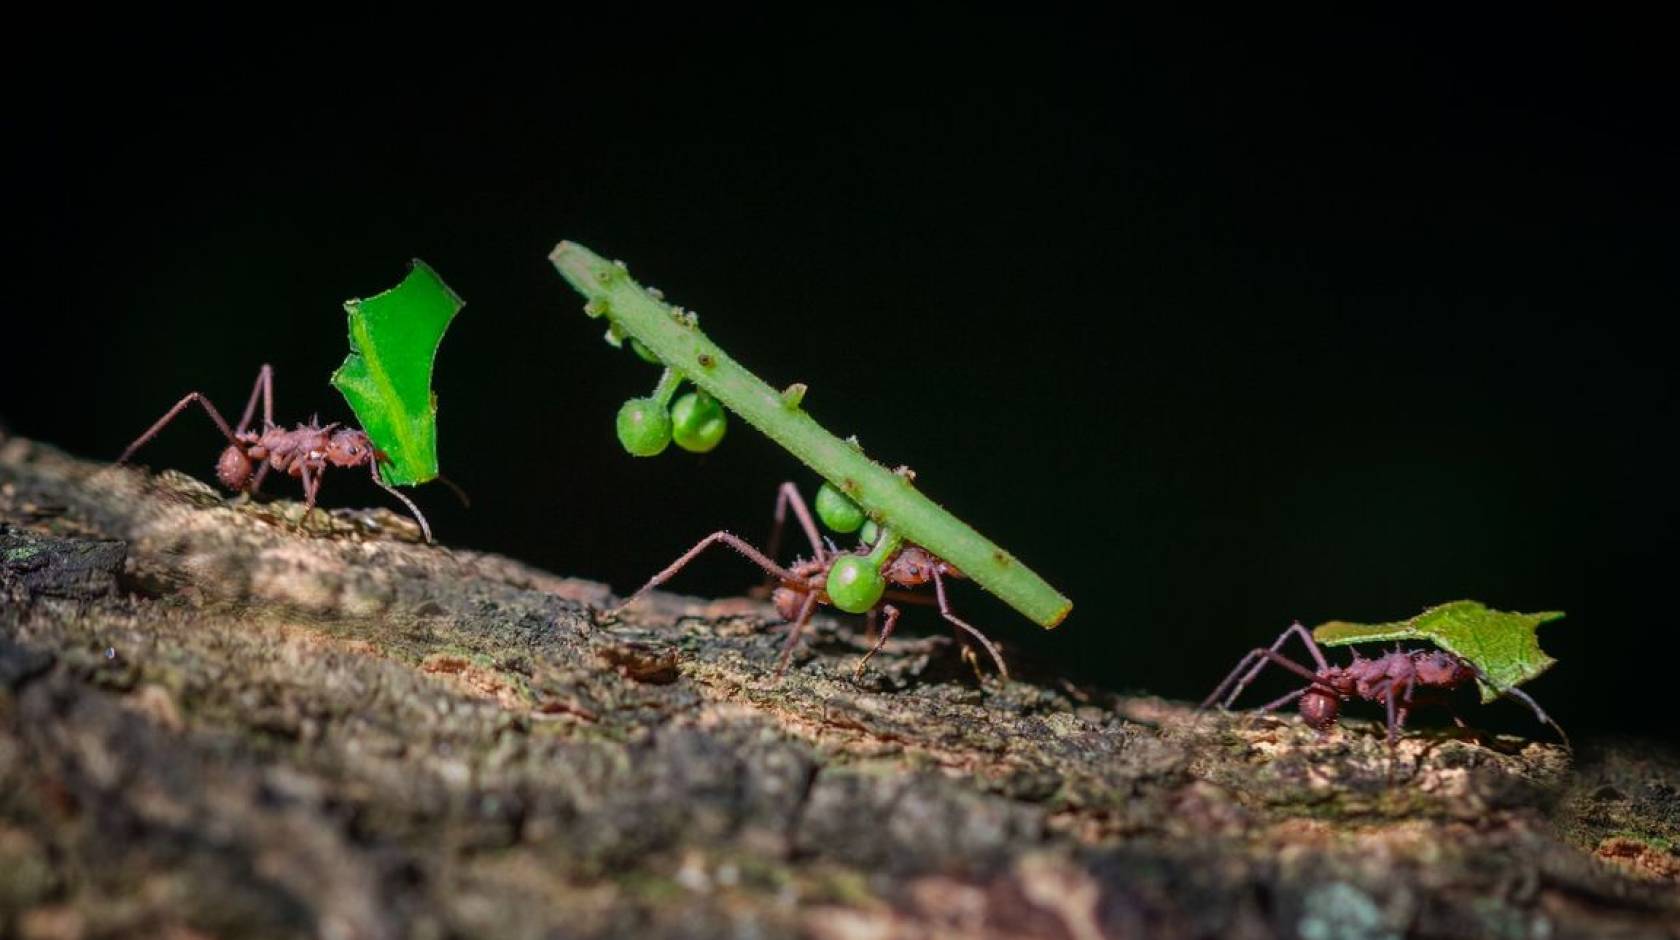 Three ants carrying green leaves and sticks along sloped dirt with a dark background